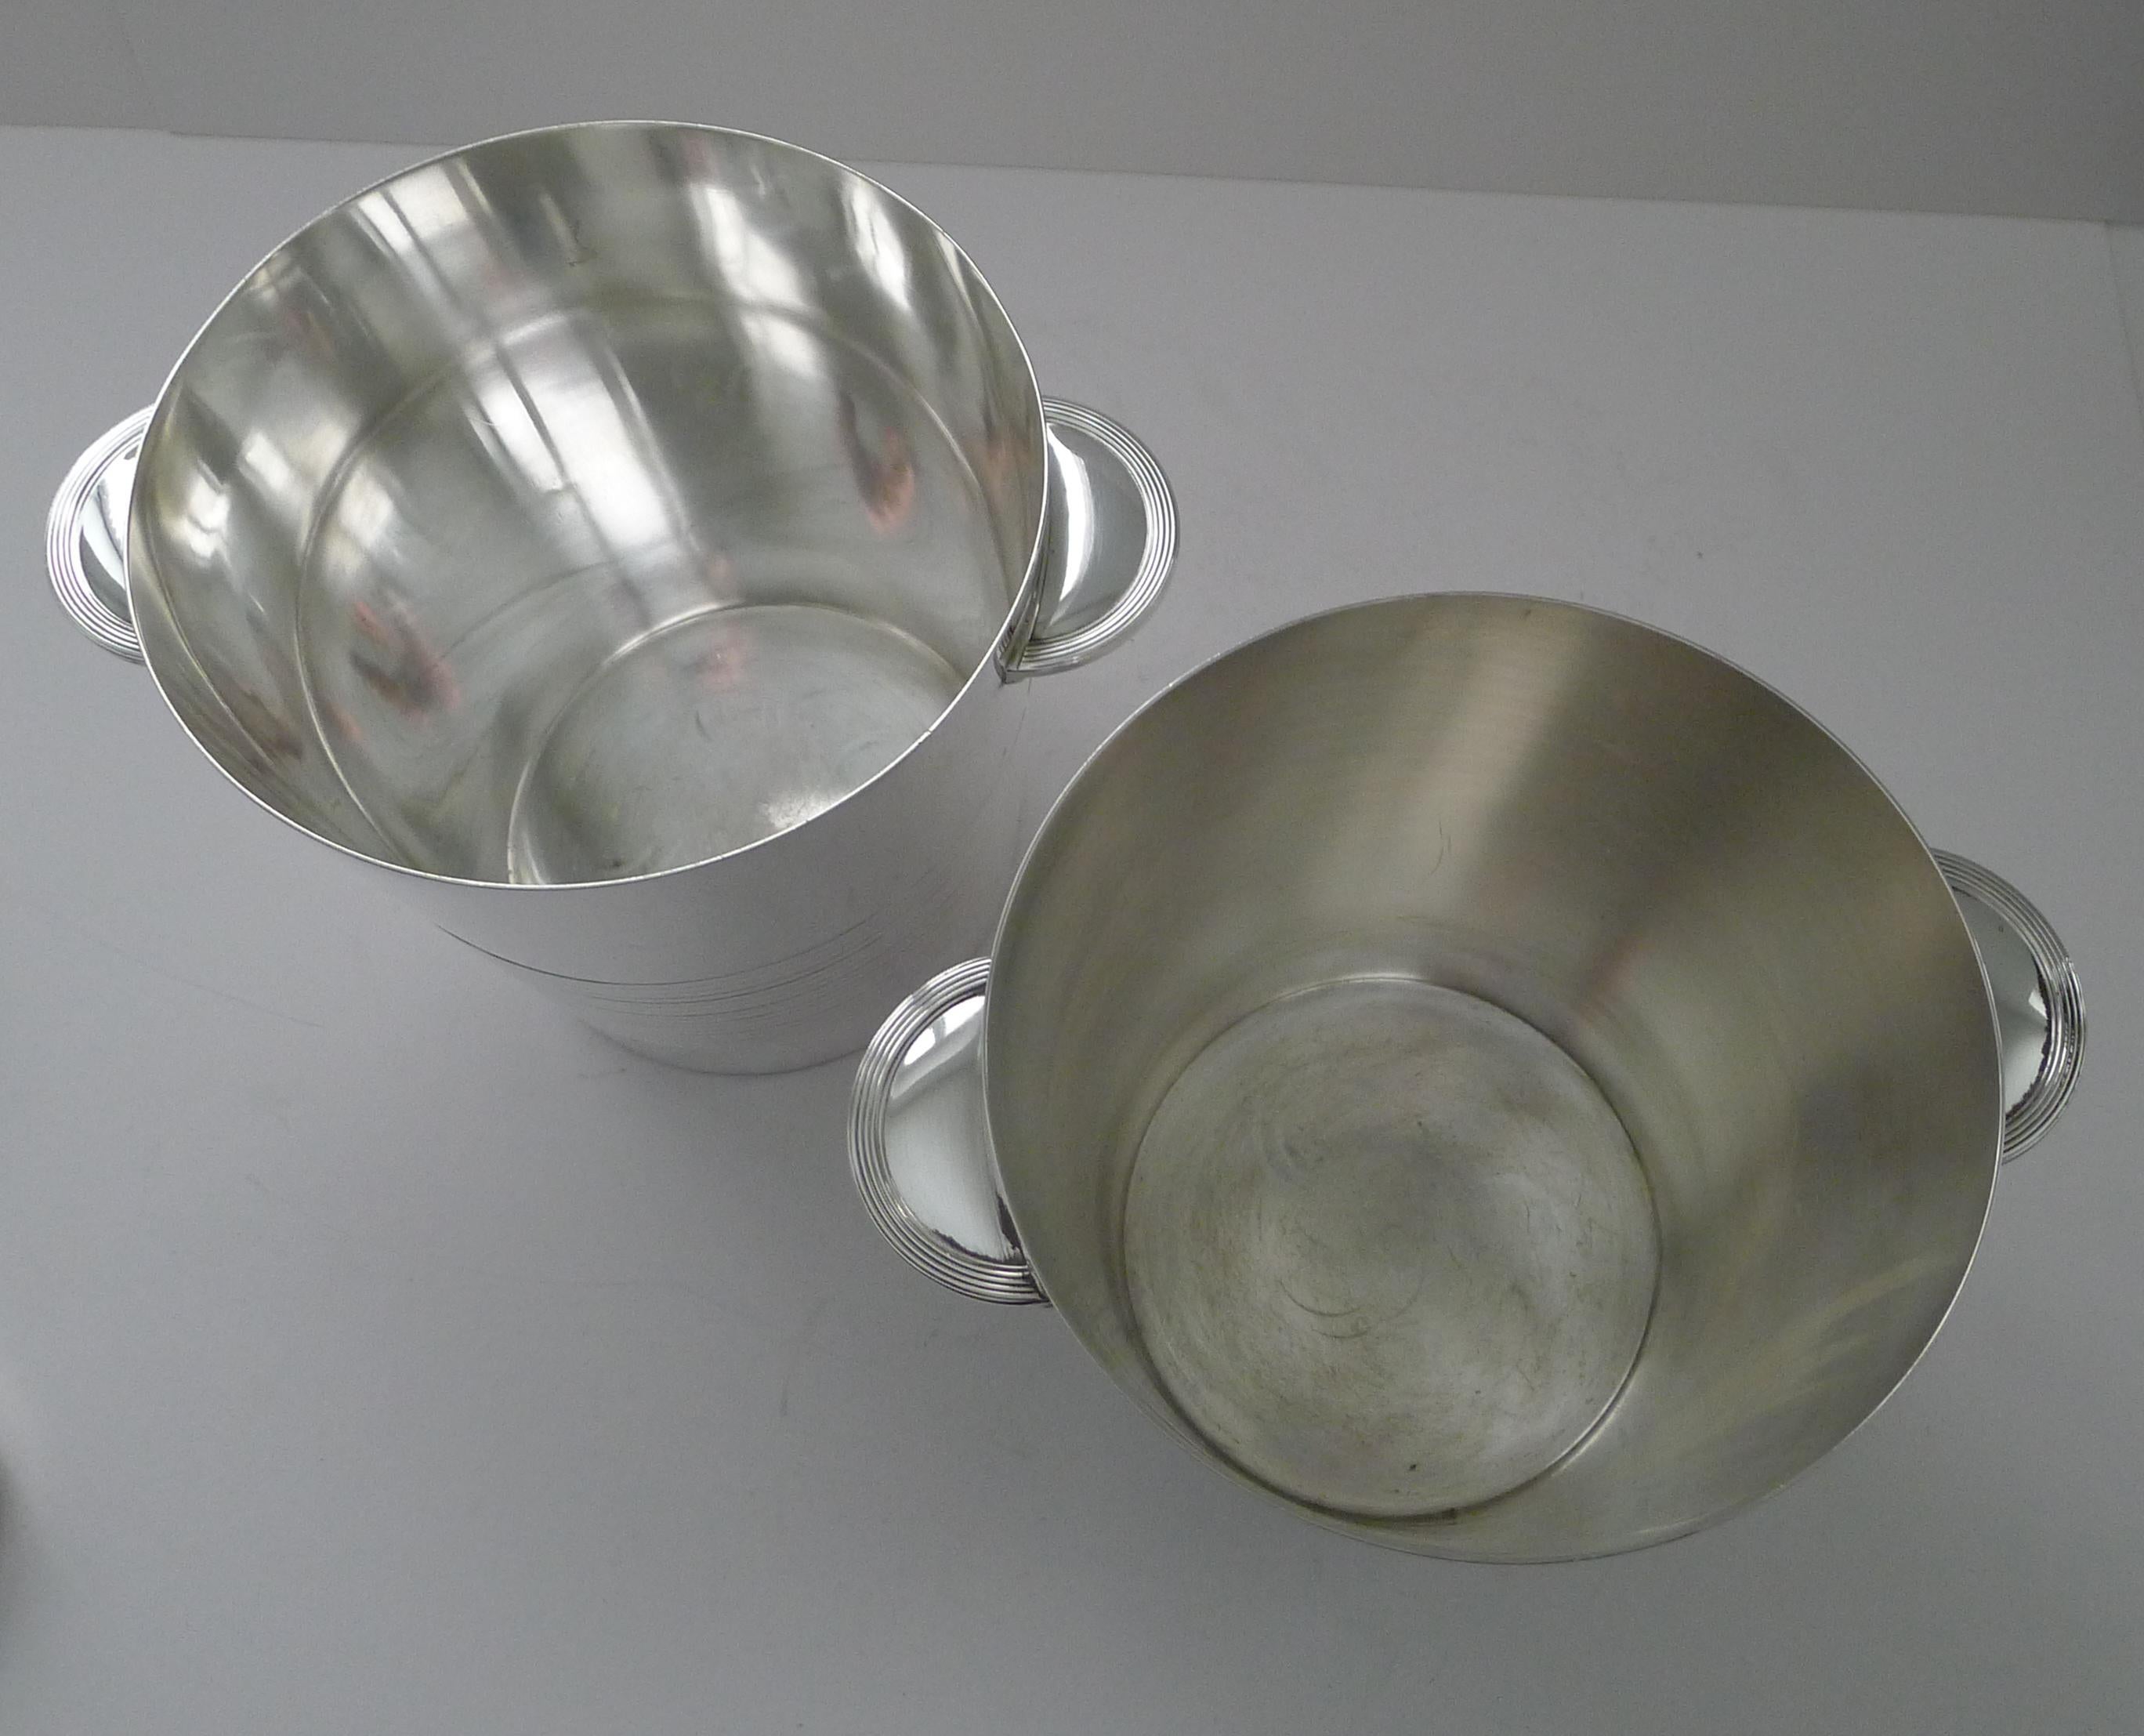 A rare opportunity to purchase a matching pair of iconic French Art Deco Champagne buckets / wine coolers.

These highly sought-after Champagne buckets were designed by Luc Lanel for Chrsitofle, Paris.

This 